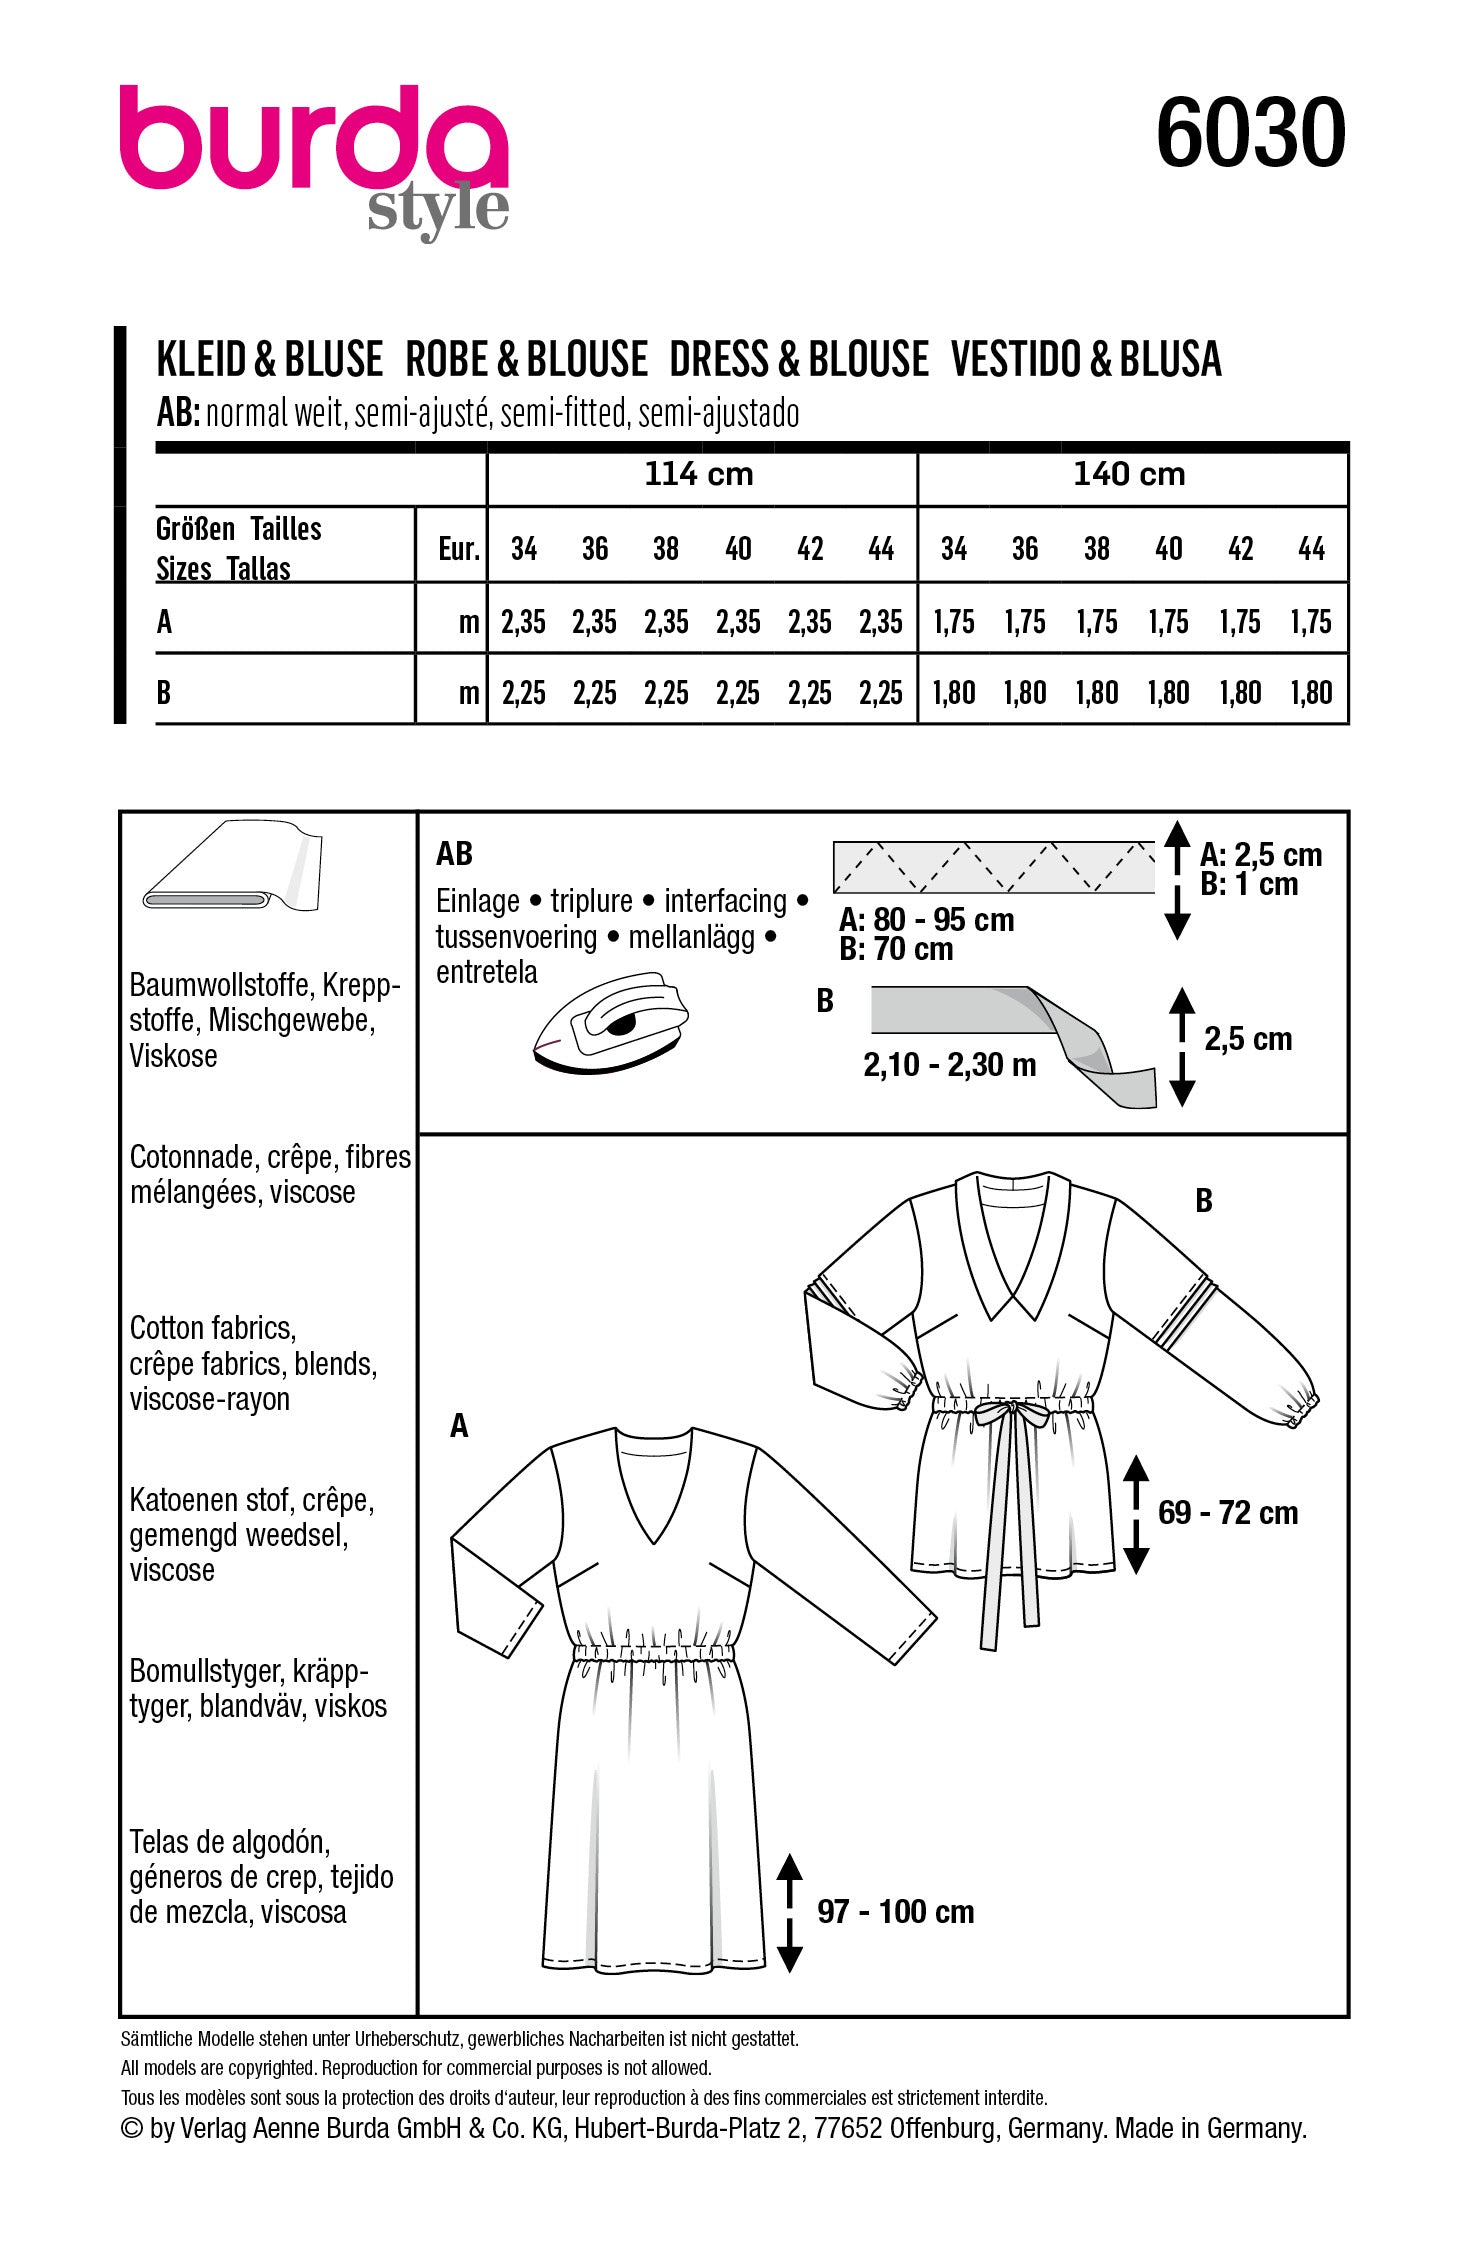 Burda Style Pattern 6030 Ladies Outerwear Dress / Blouse from Jaycotts Sewing Supplies